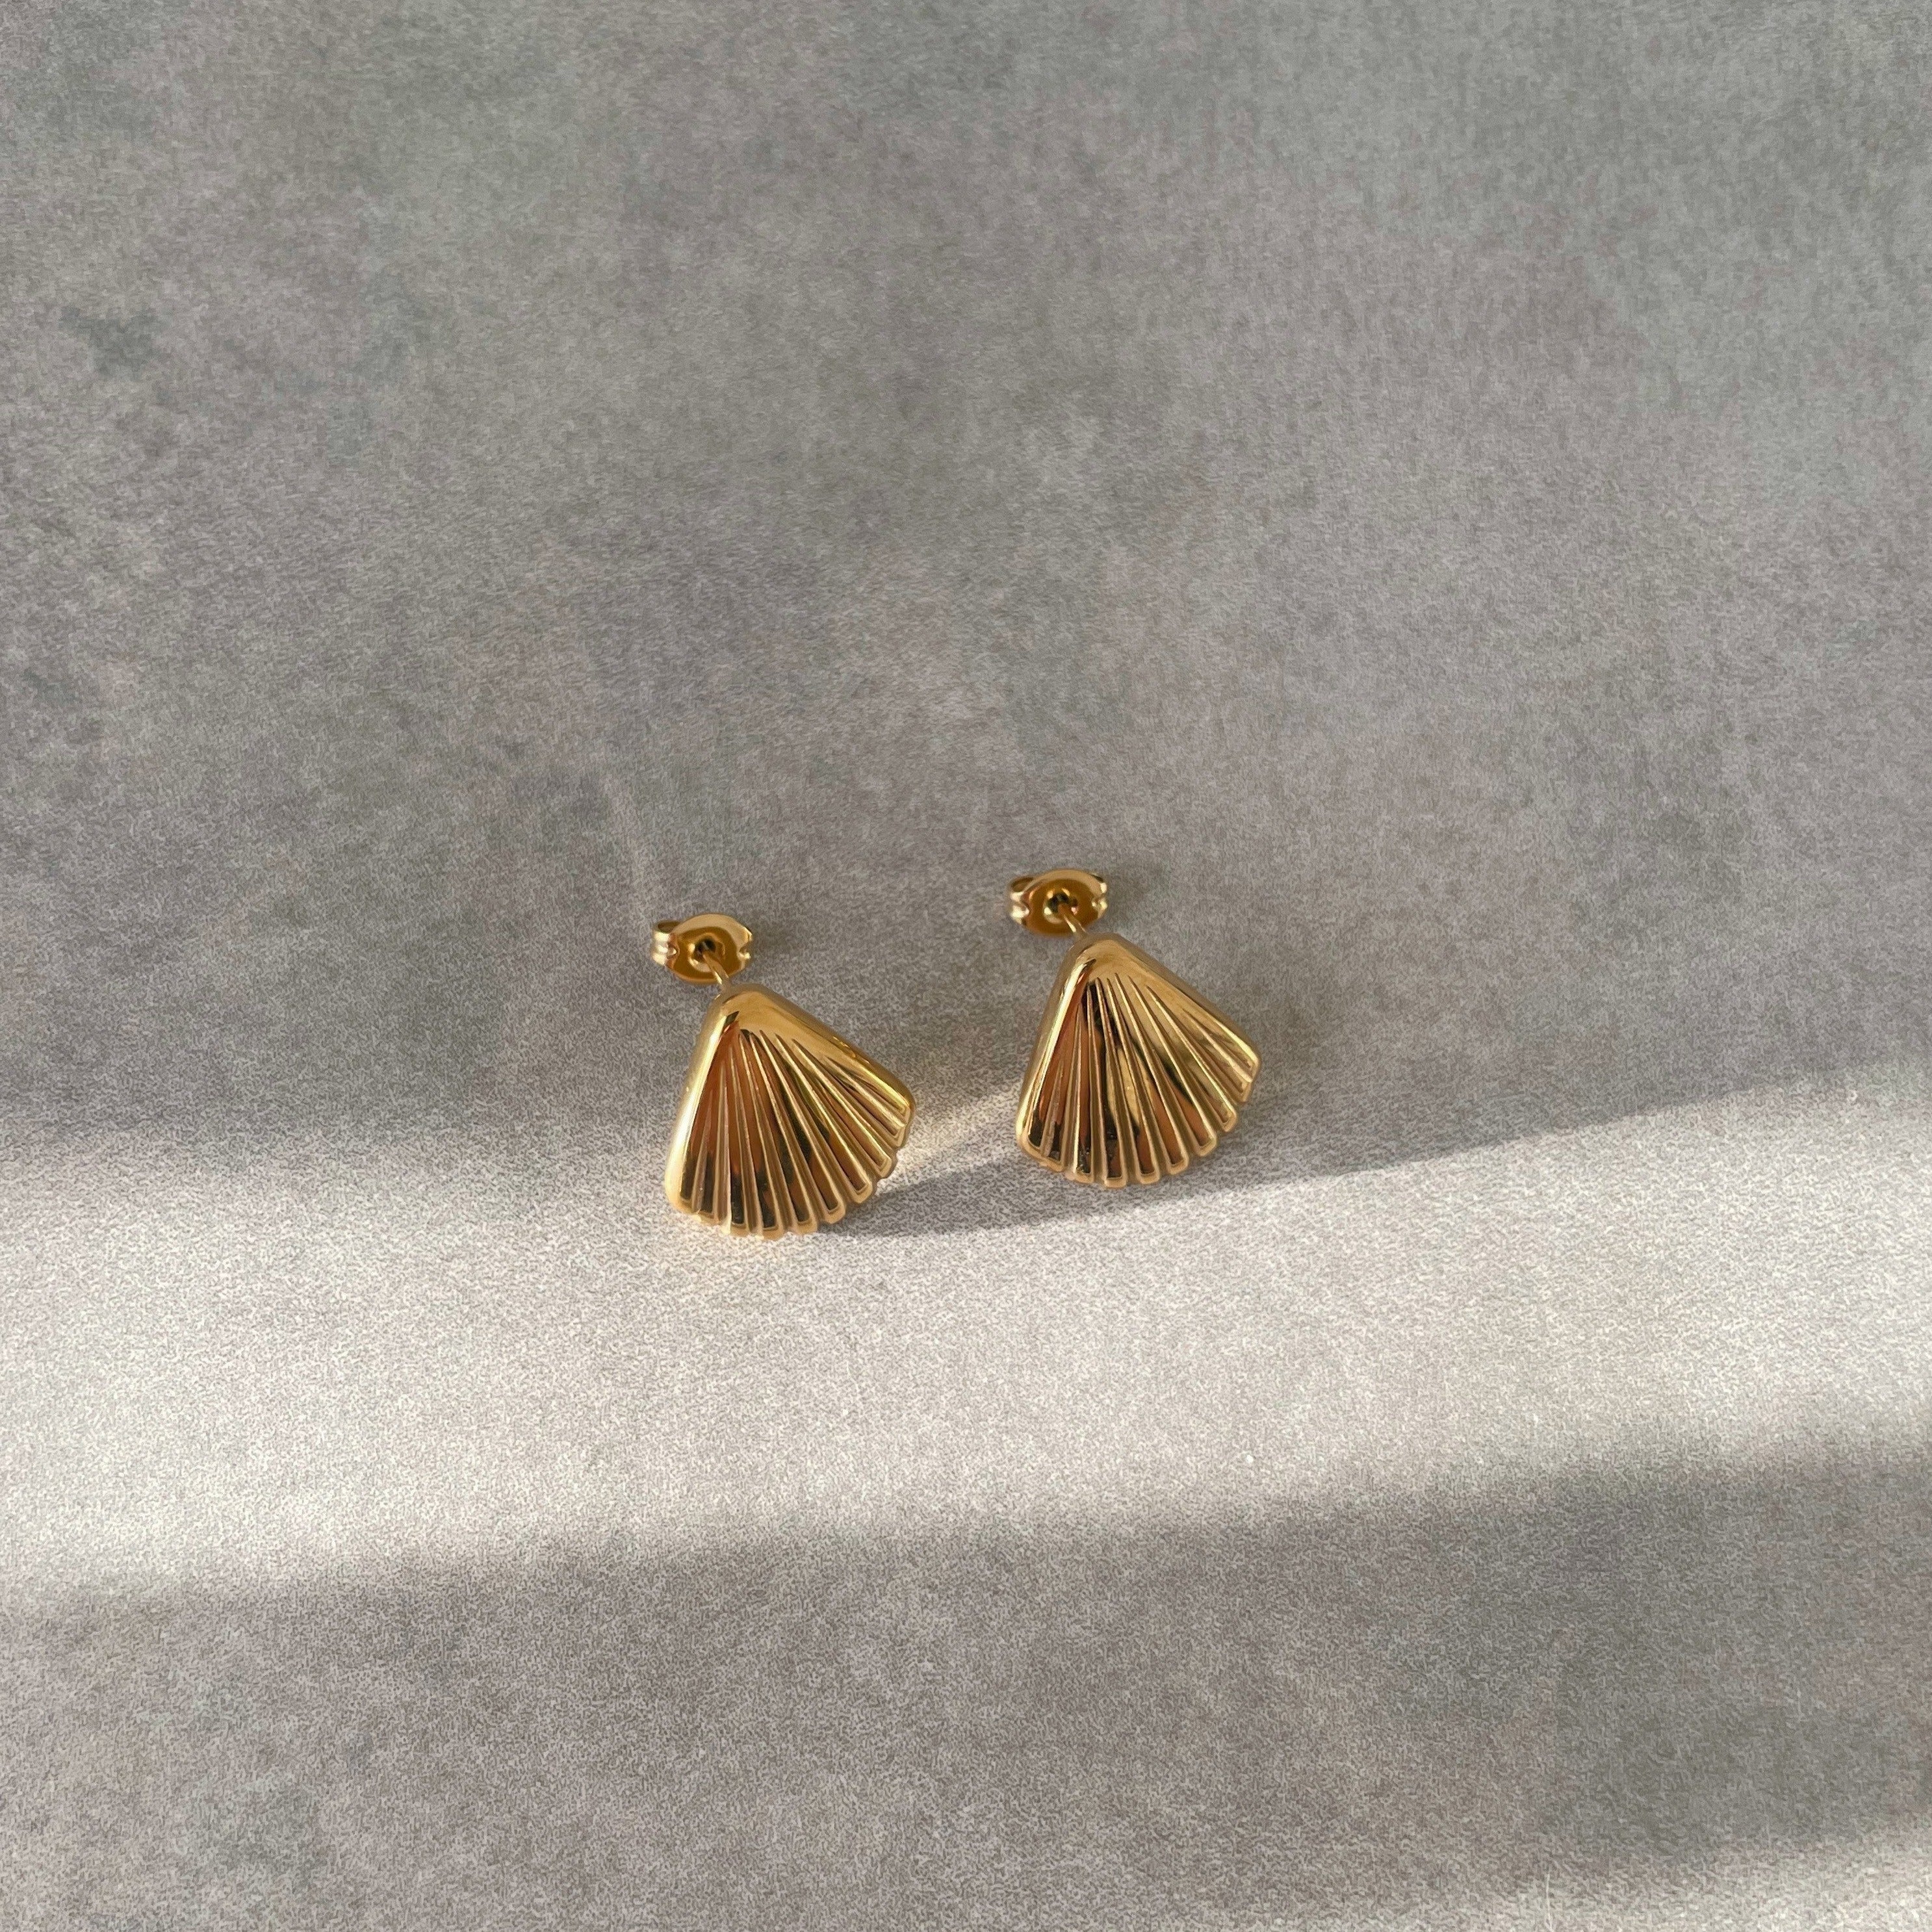 Chic Gold Shell Earrings for a touch of ocean glam